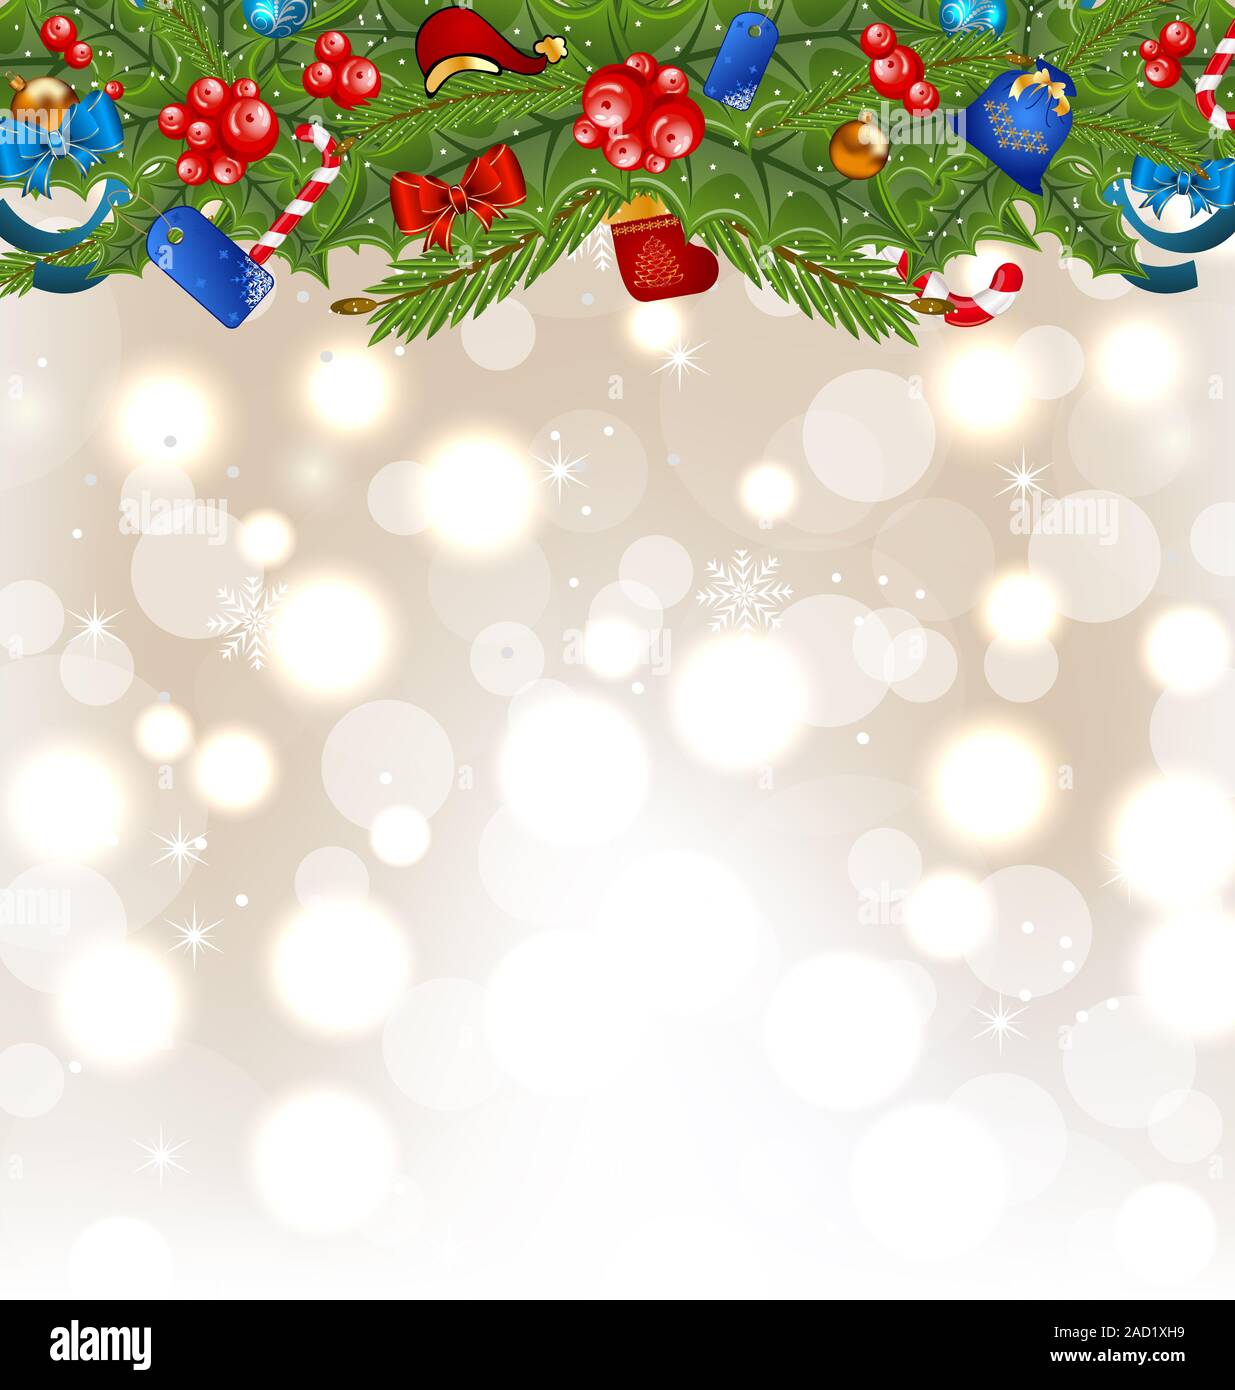 Christmas glowing background with holiday decoration Stock Photo